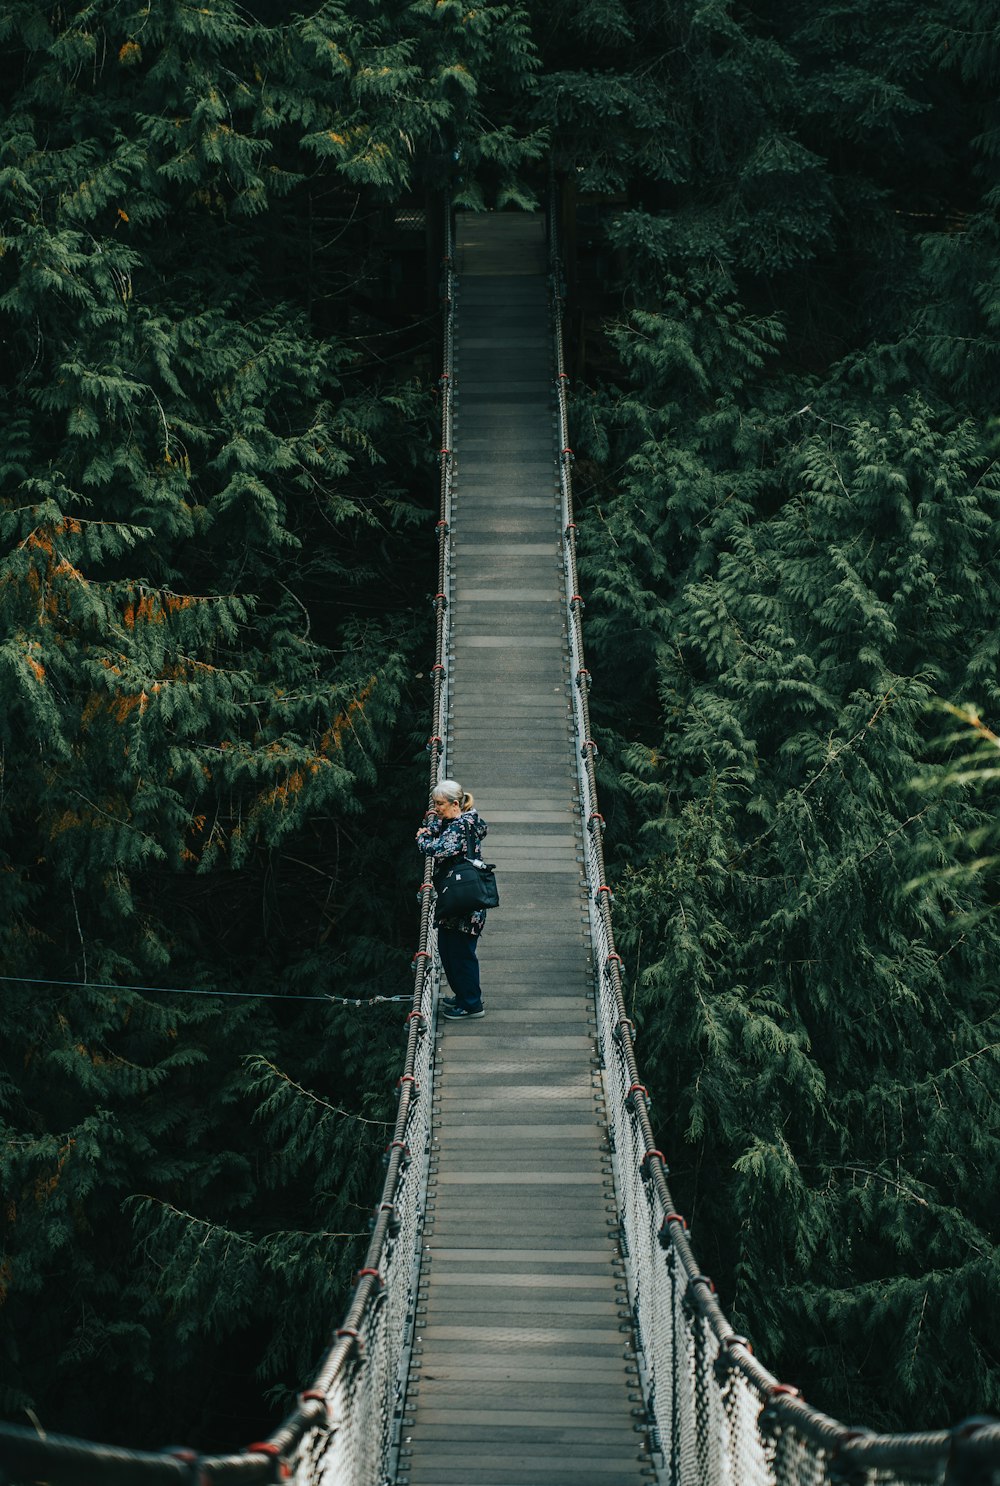 a person walking across a suspension bridge in a forest